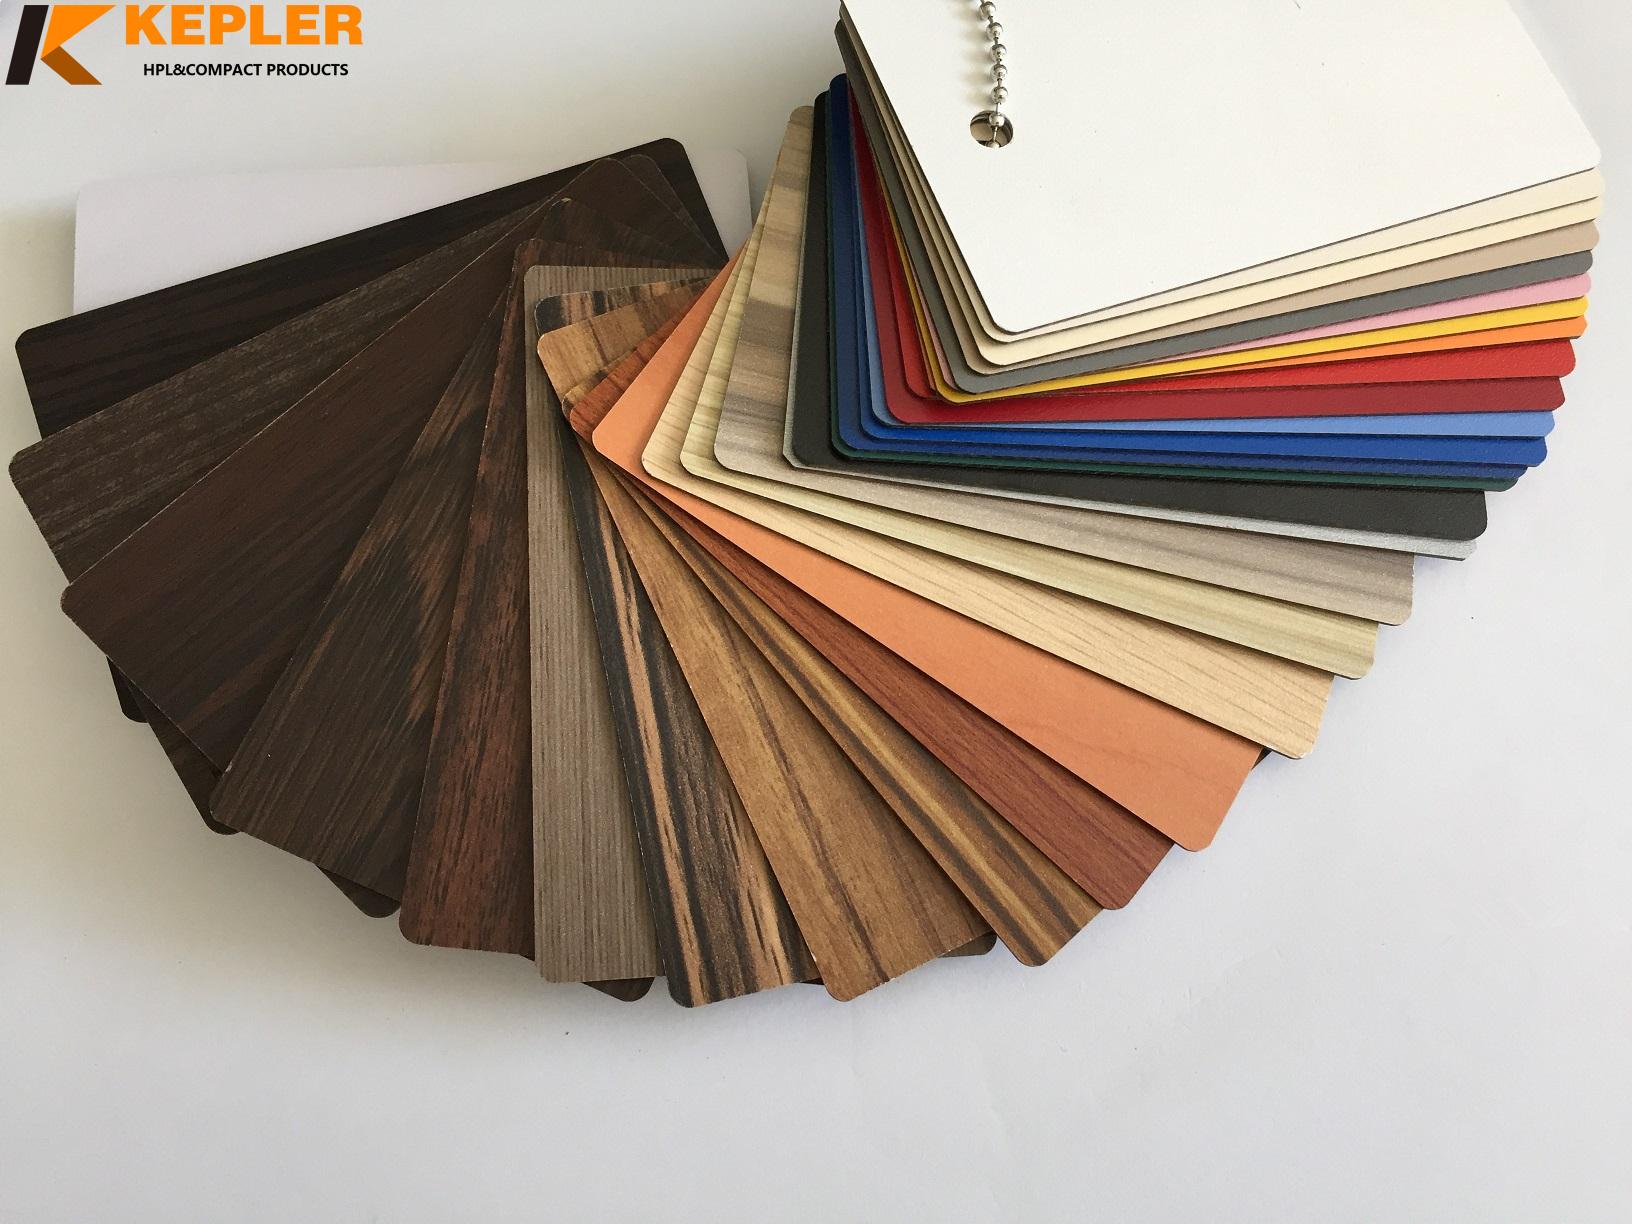 Kepler decorative high glossy shine black high pressure laminate sheet covered with plastic protective film